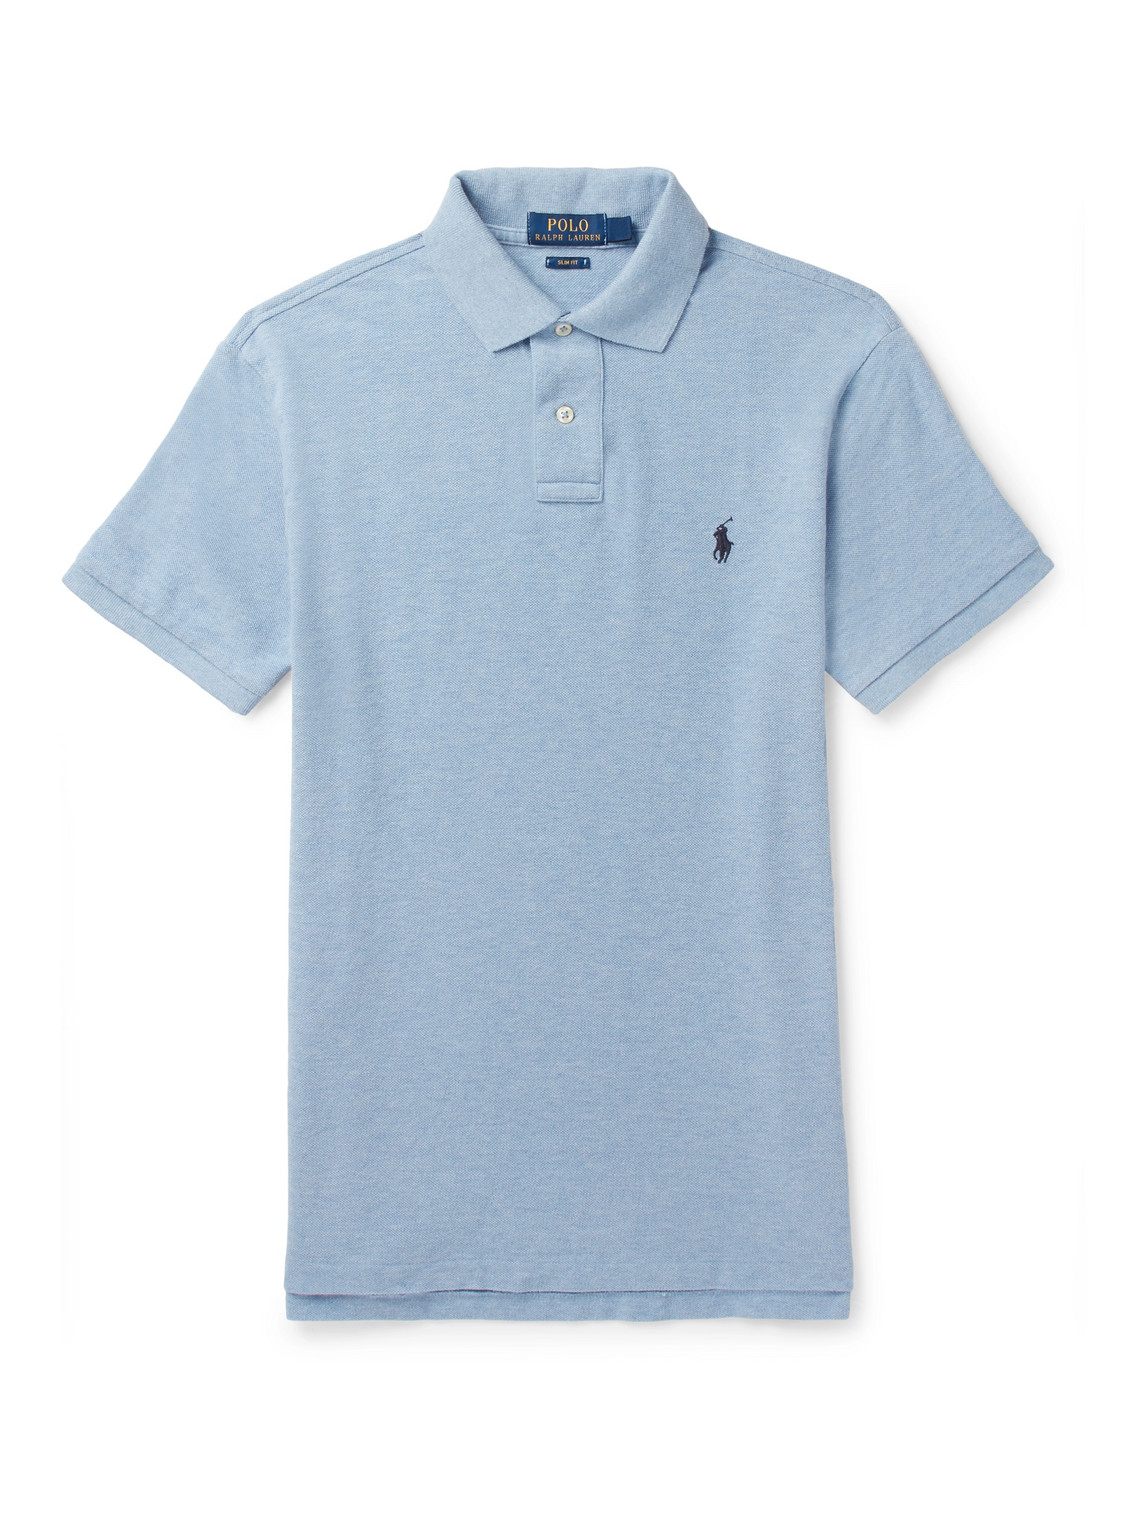 Stretch Mesh Classic Fit Polo Shirt In Jamaica Heather Blue